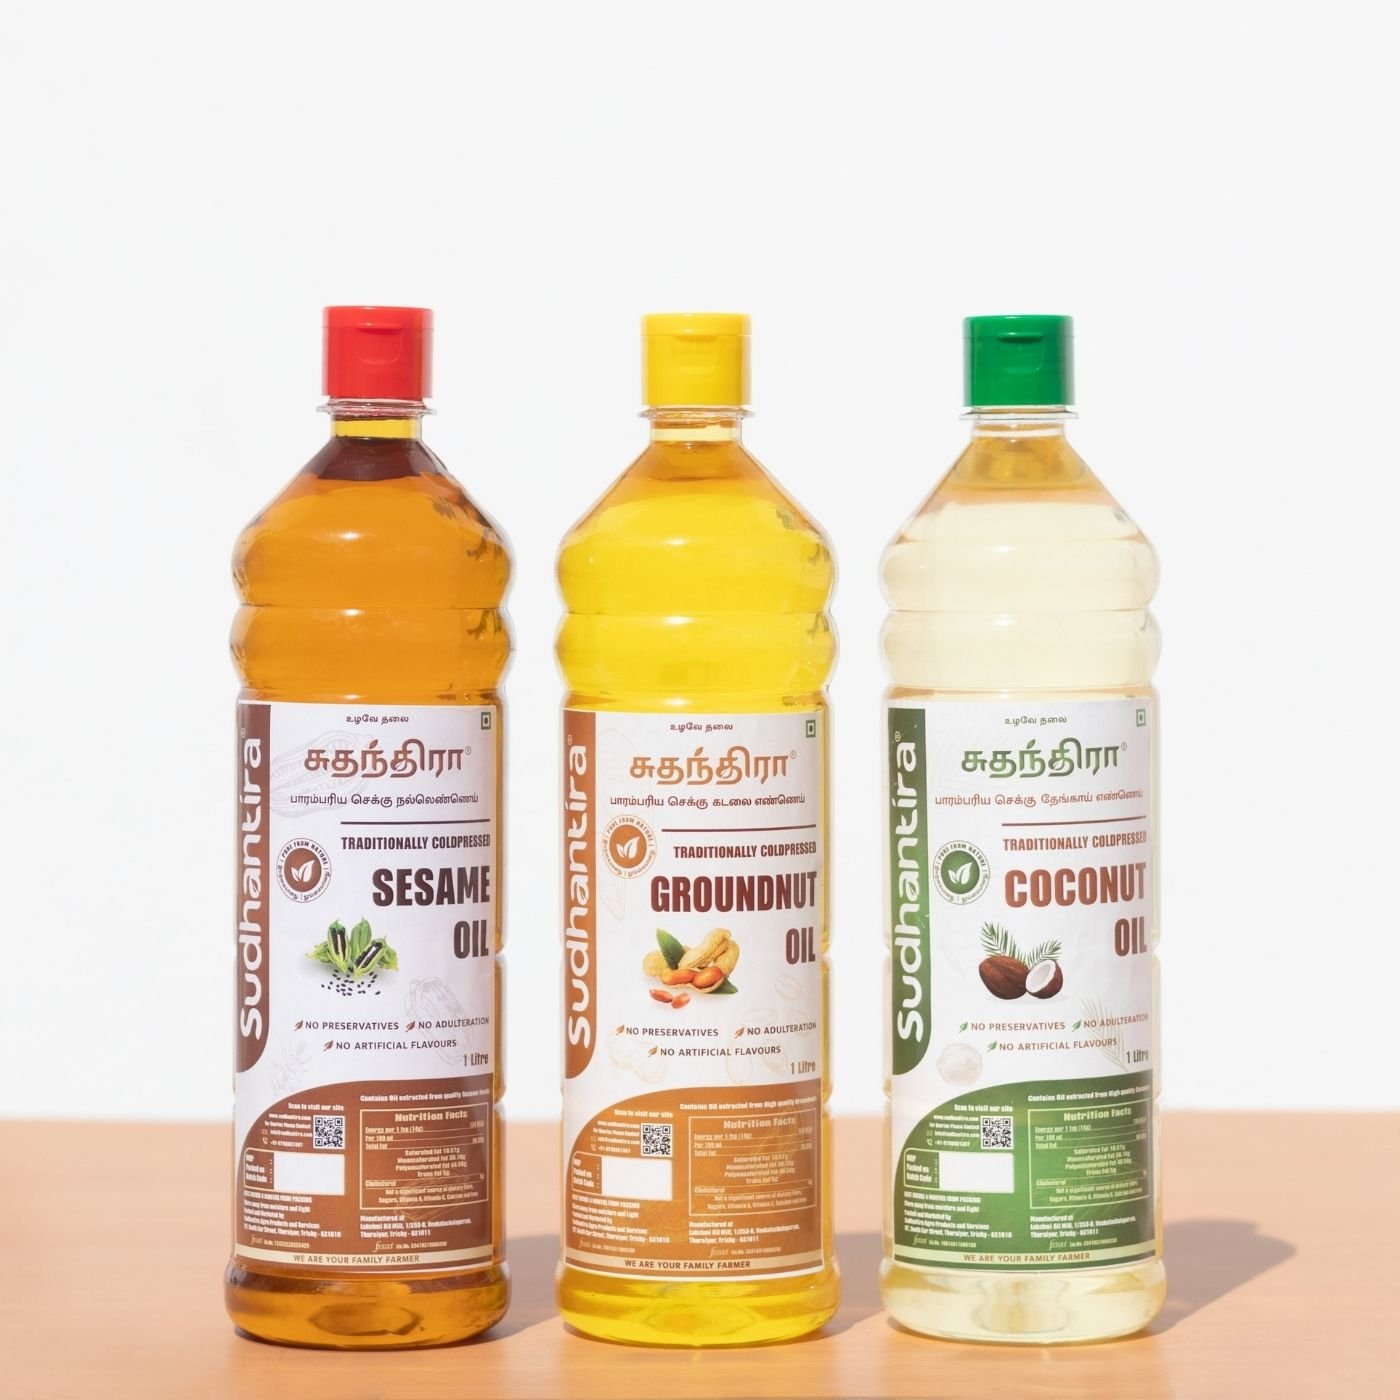 Groundnut Oil - Cold Pressed - Coldpressed Oil